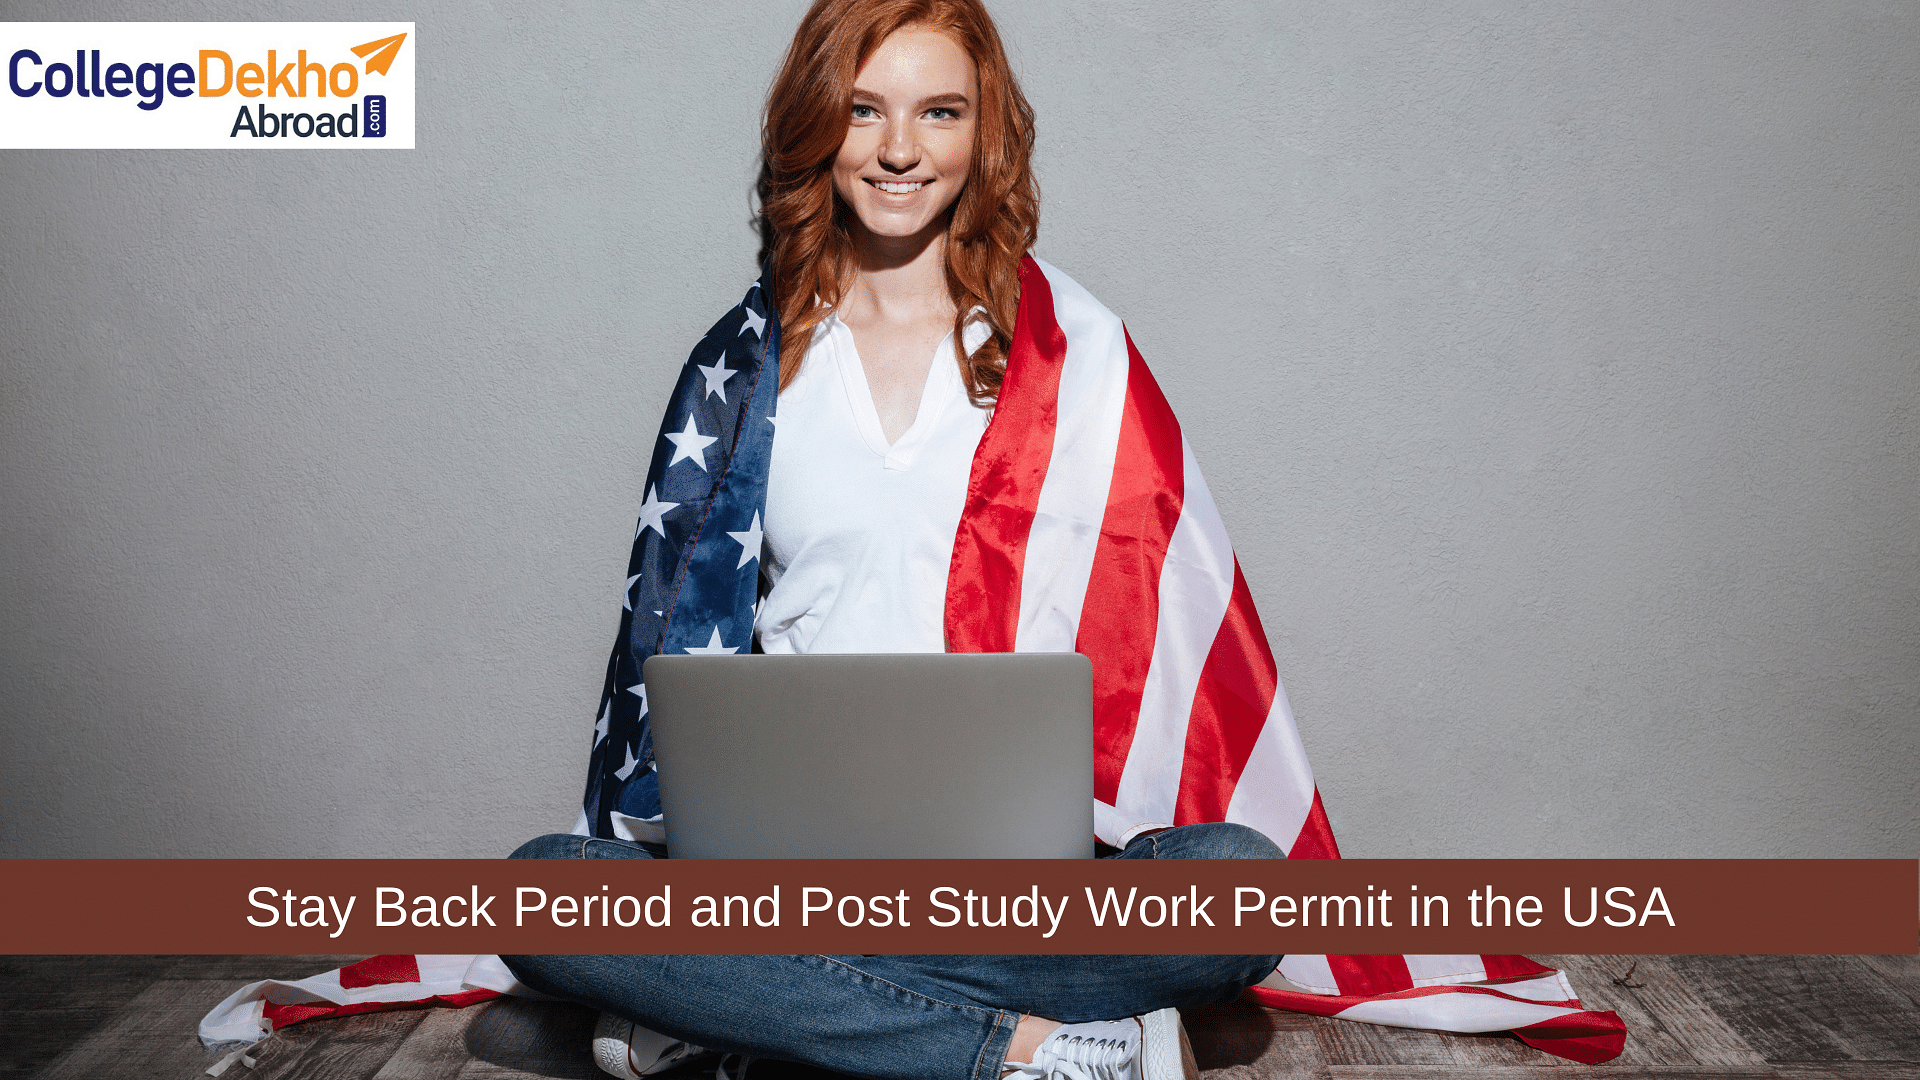 Stay Back and Post Study Work Permit in the USA